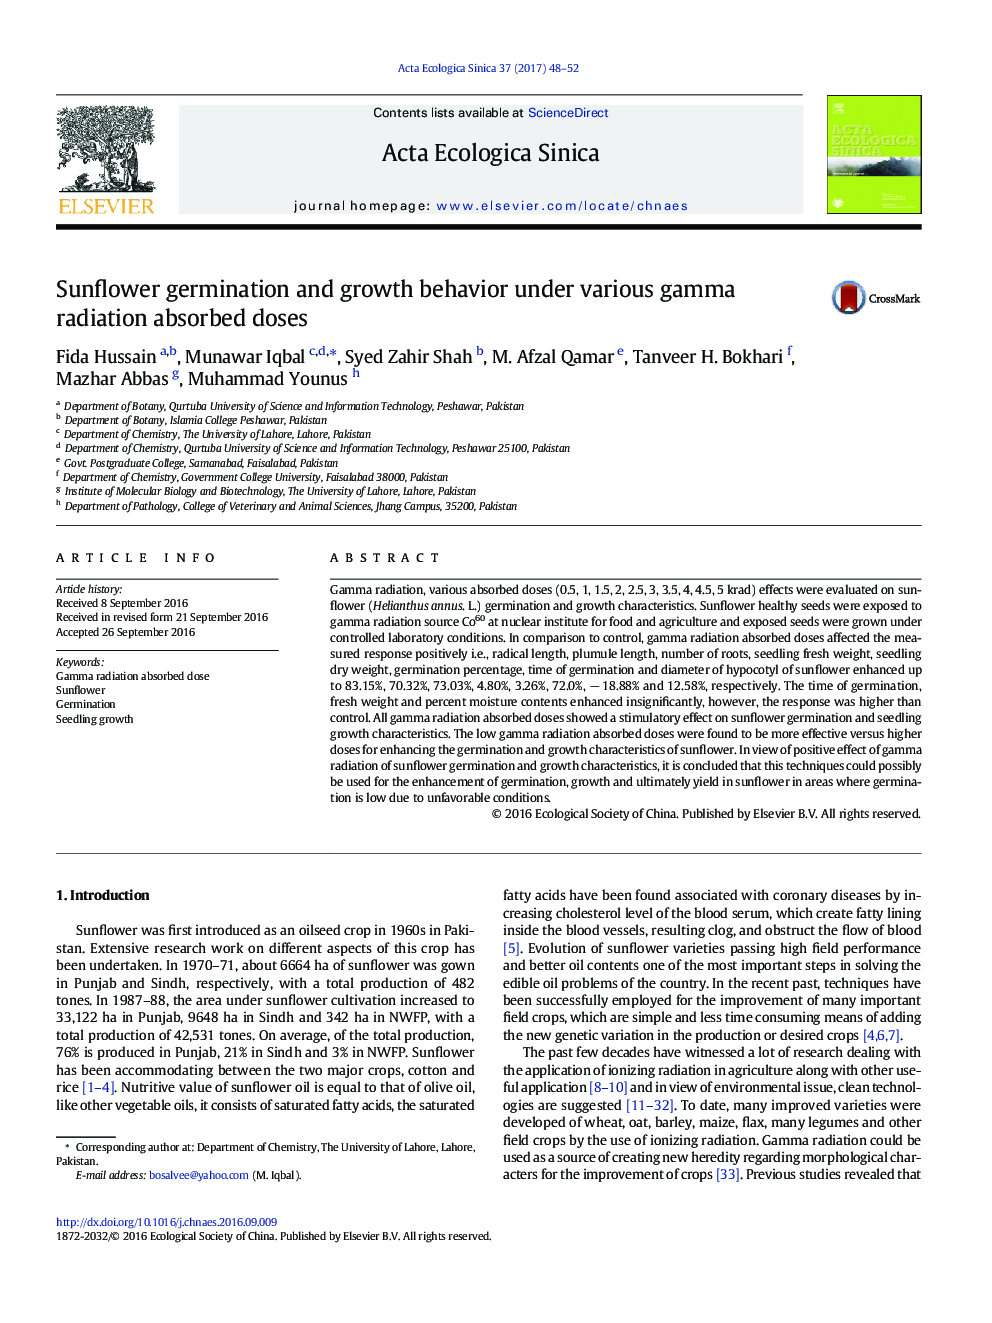 Sunflower germination and growth behavior under various gamma radiation absorbed doses